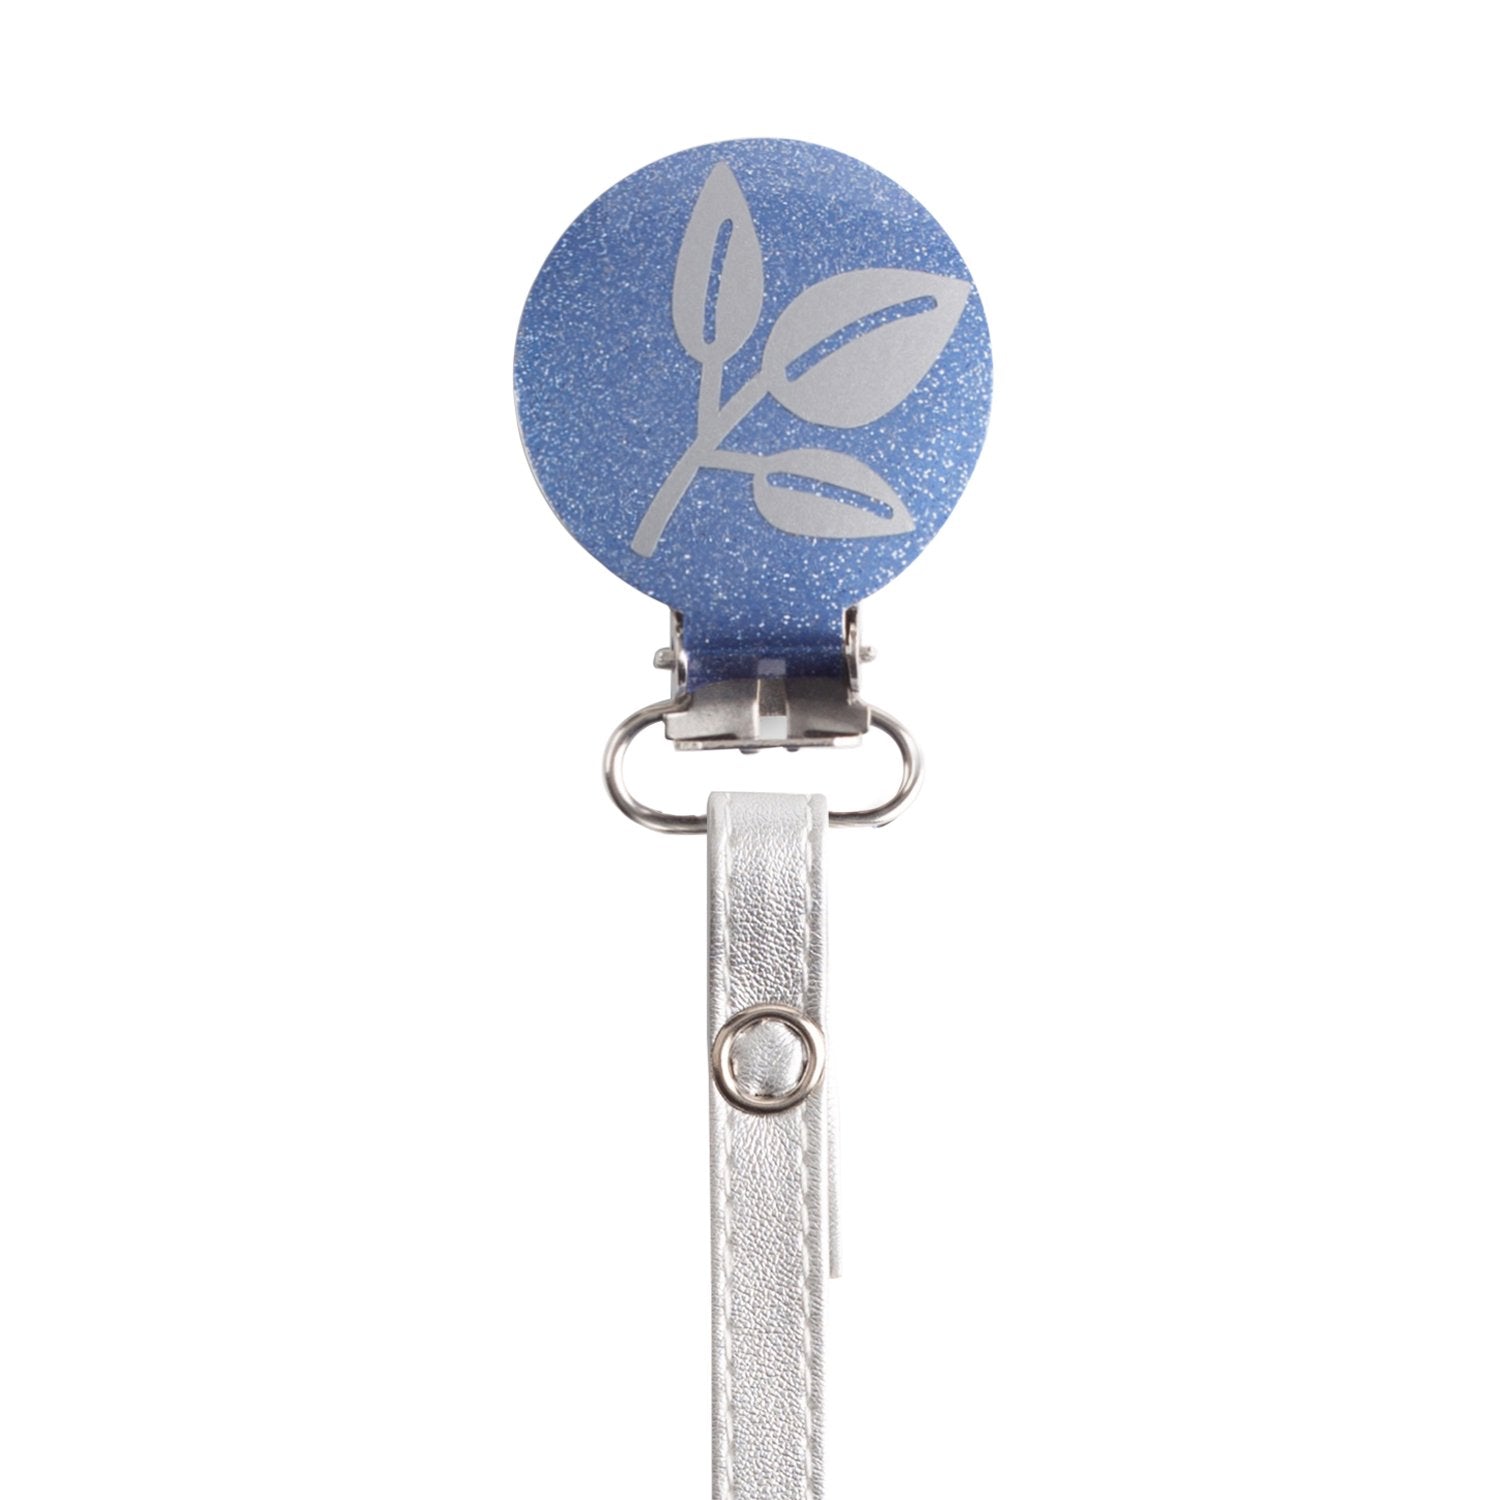 Classy Paci Sparkle blue with silver grey leaf Pacifier Clip GIFT SET FW21-22